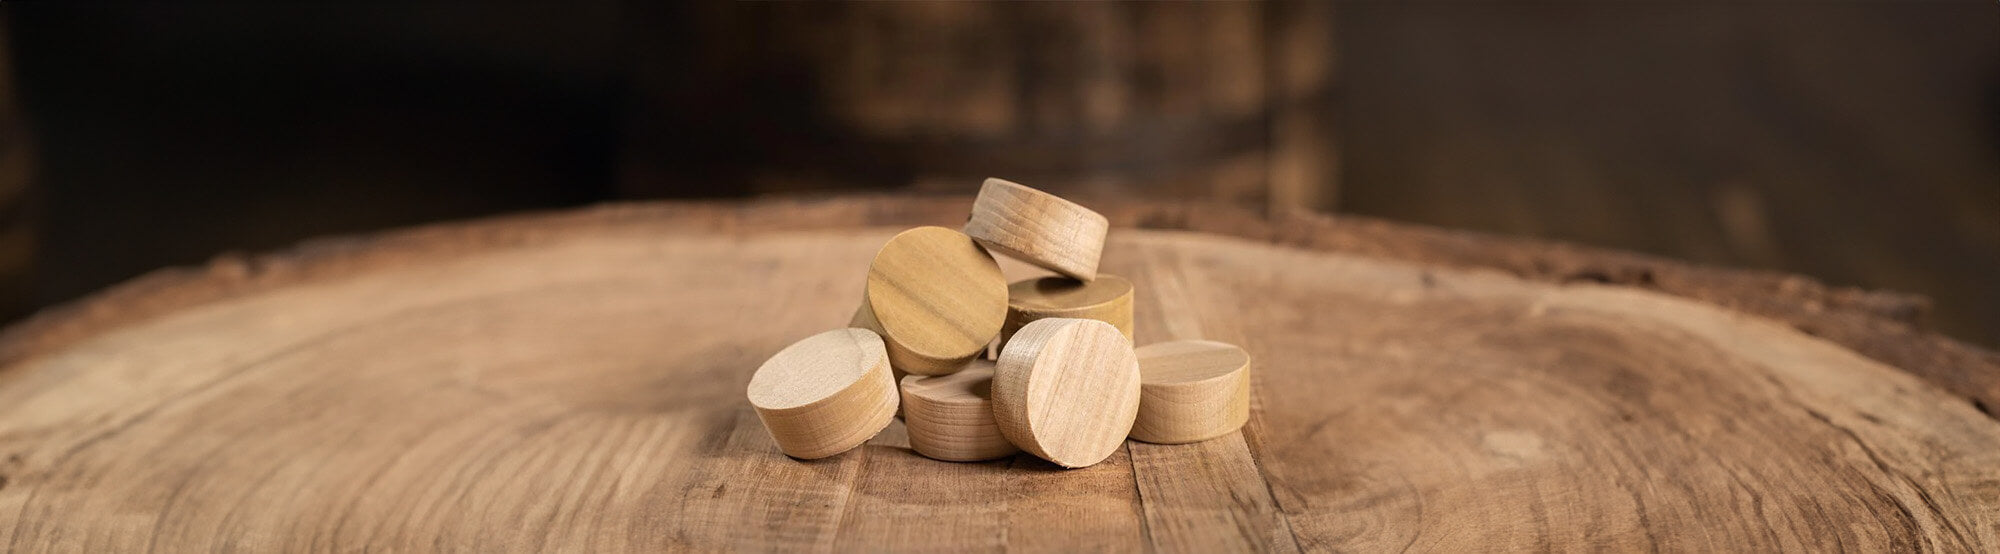 Wooden bungs for whiskey and wine barrels